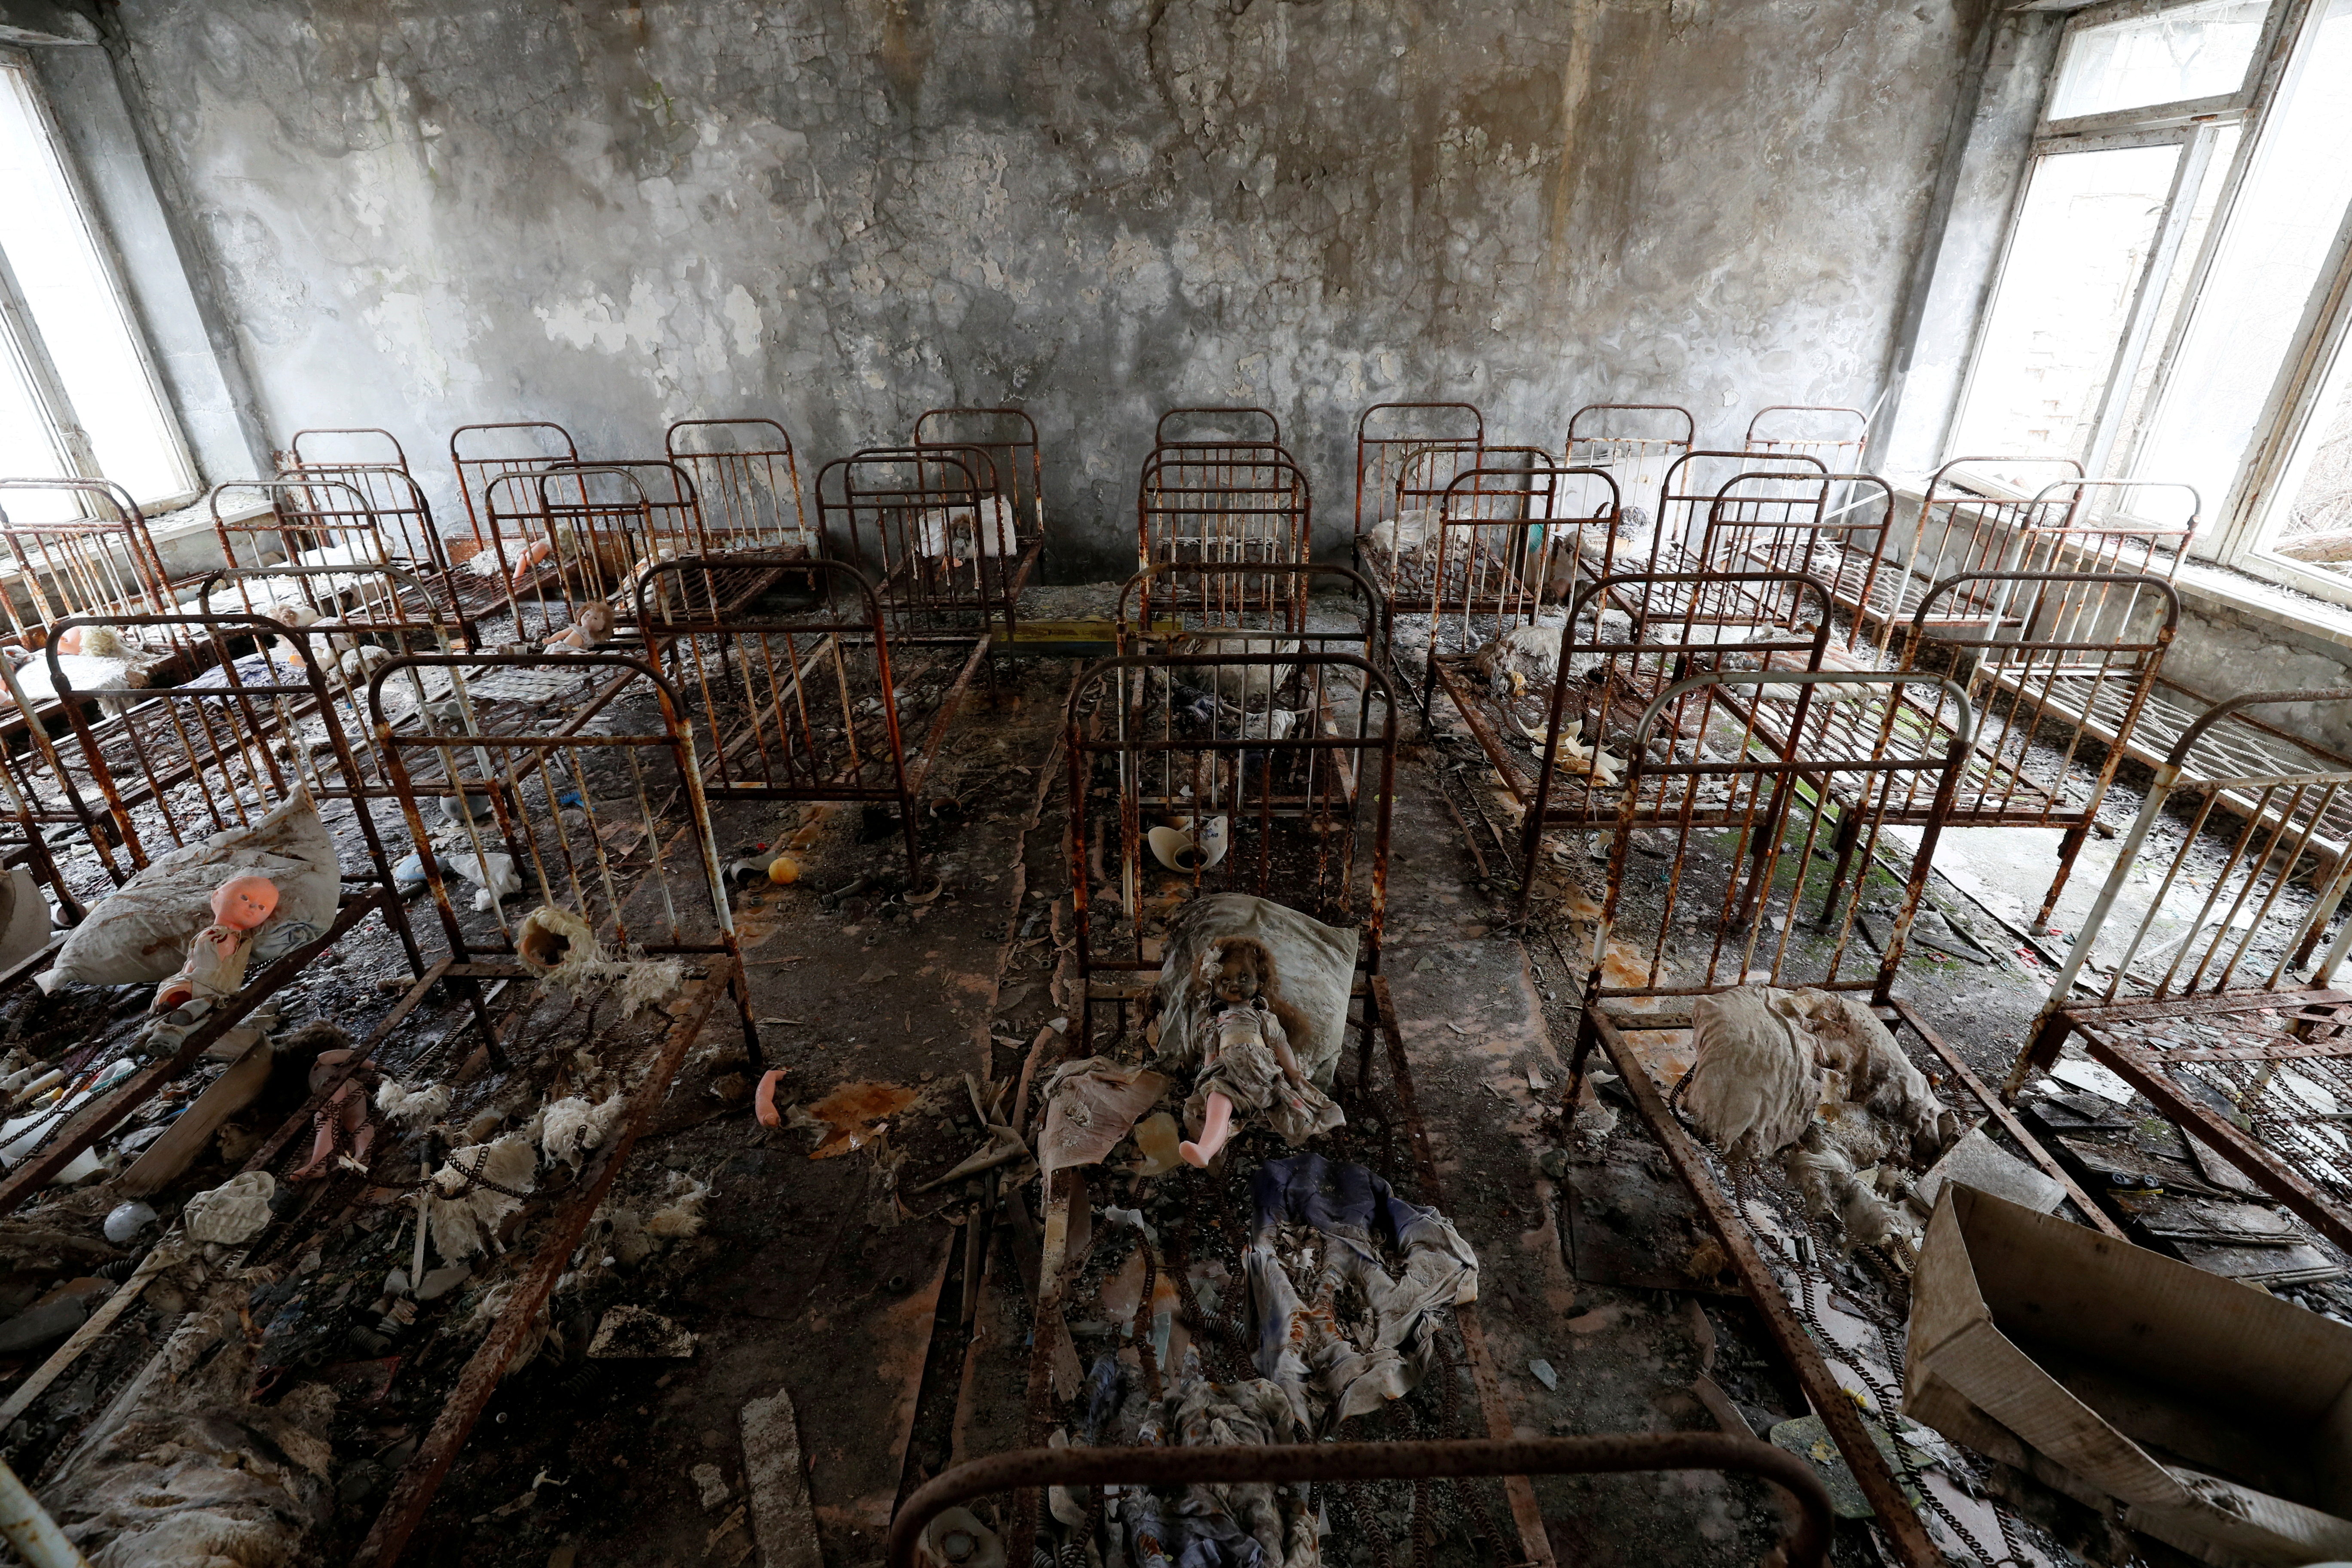 Children's beds are seen in a kindergarten near the Chernobyl Nuclear Power Plant in the abandoned city of Pripyat